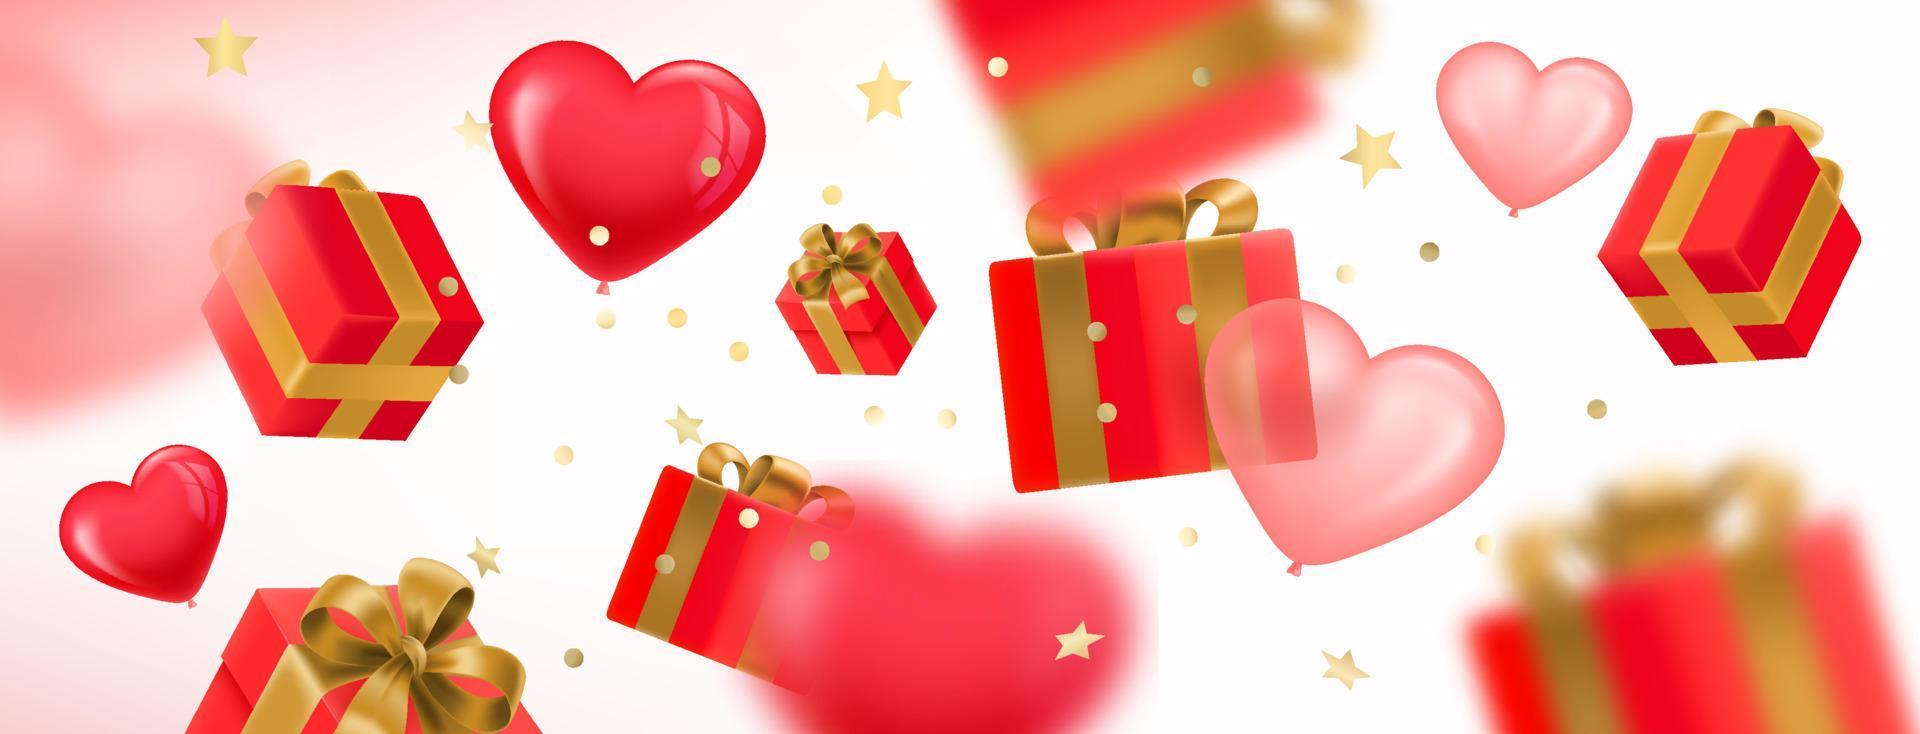 Gift boxes and hearts falling down. Happy Valentines day concept. 3d vector illustration